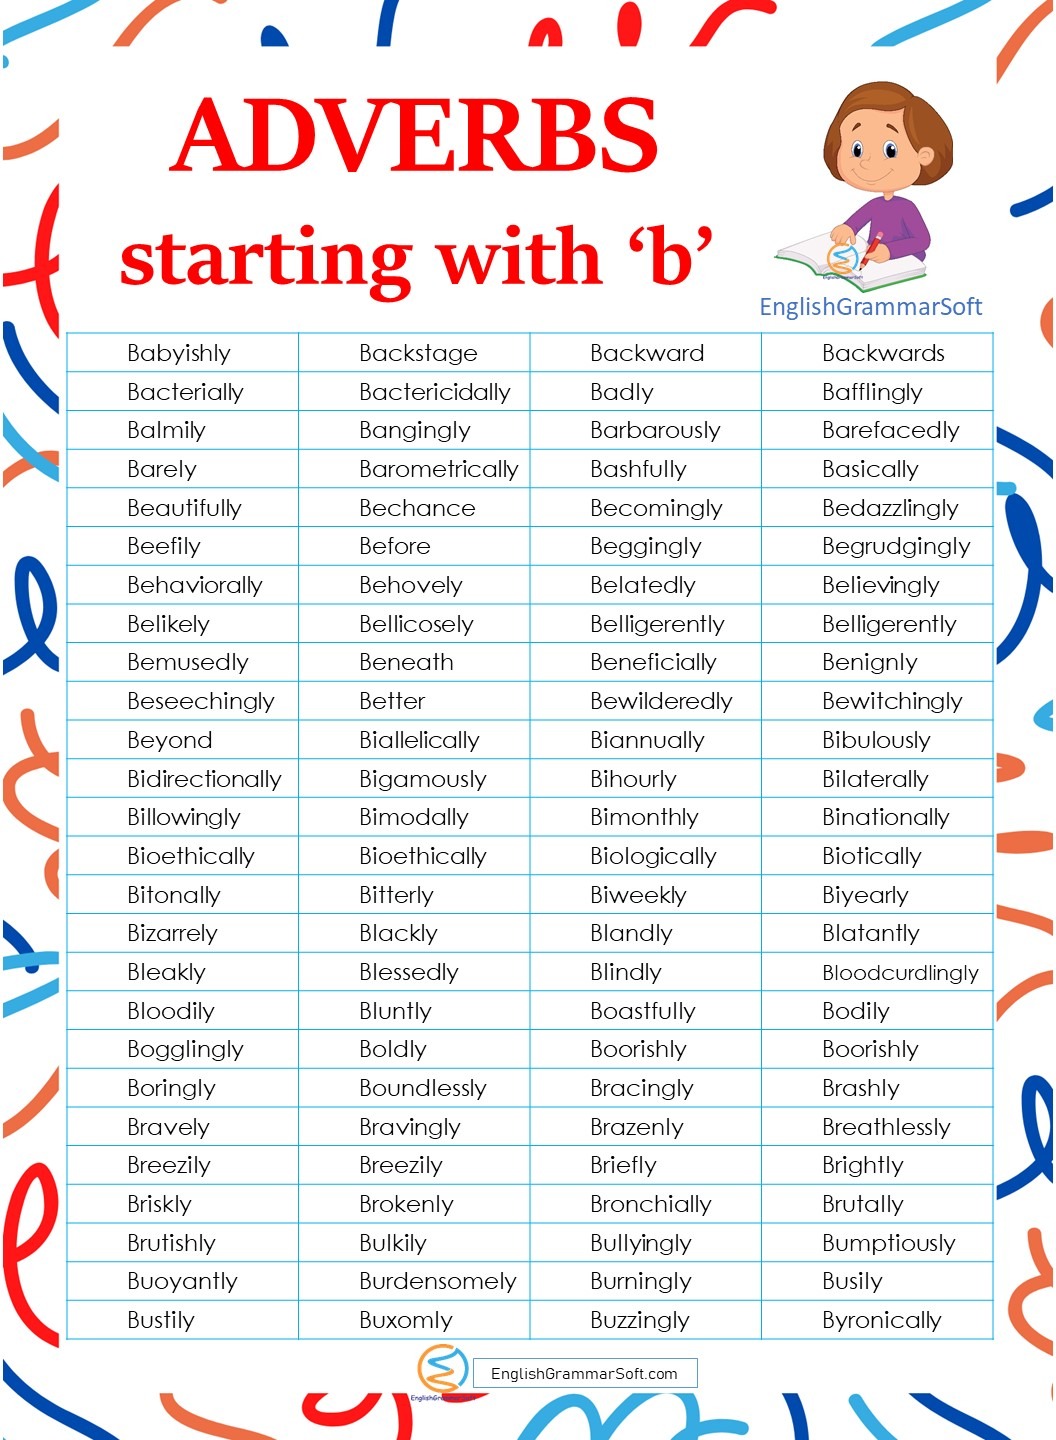 adverbs starting with b